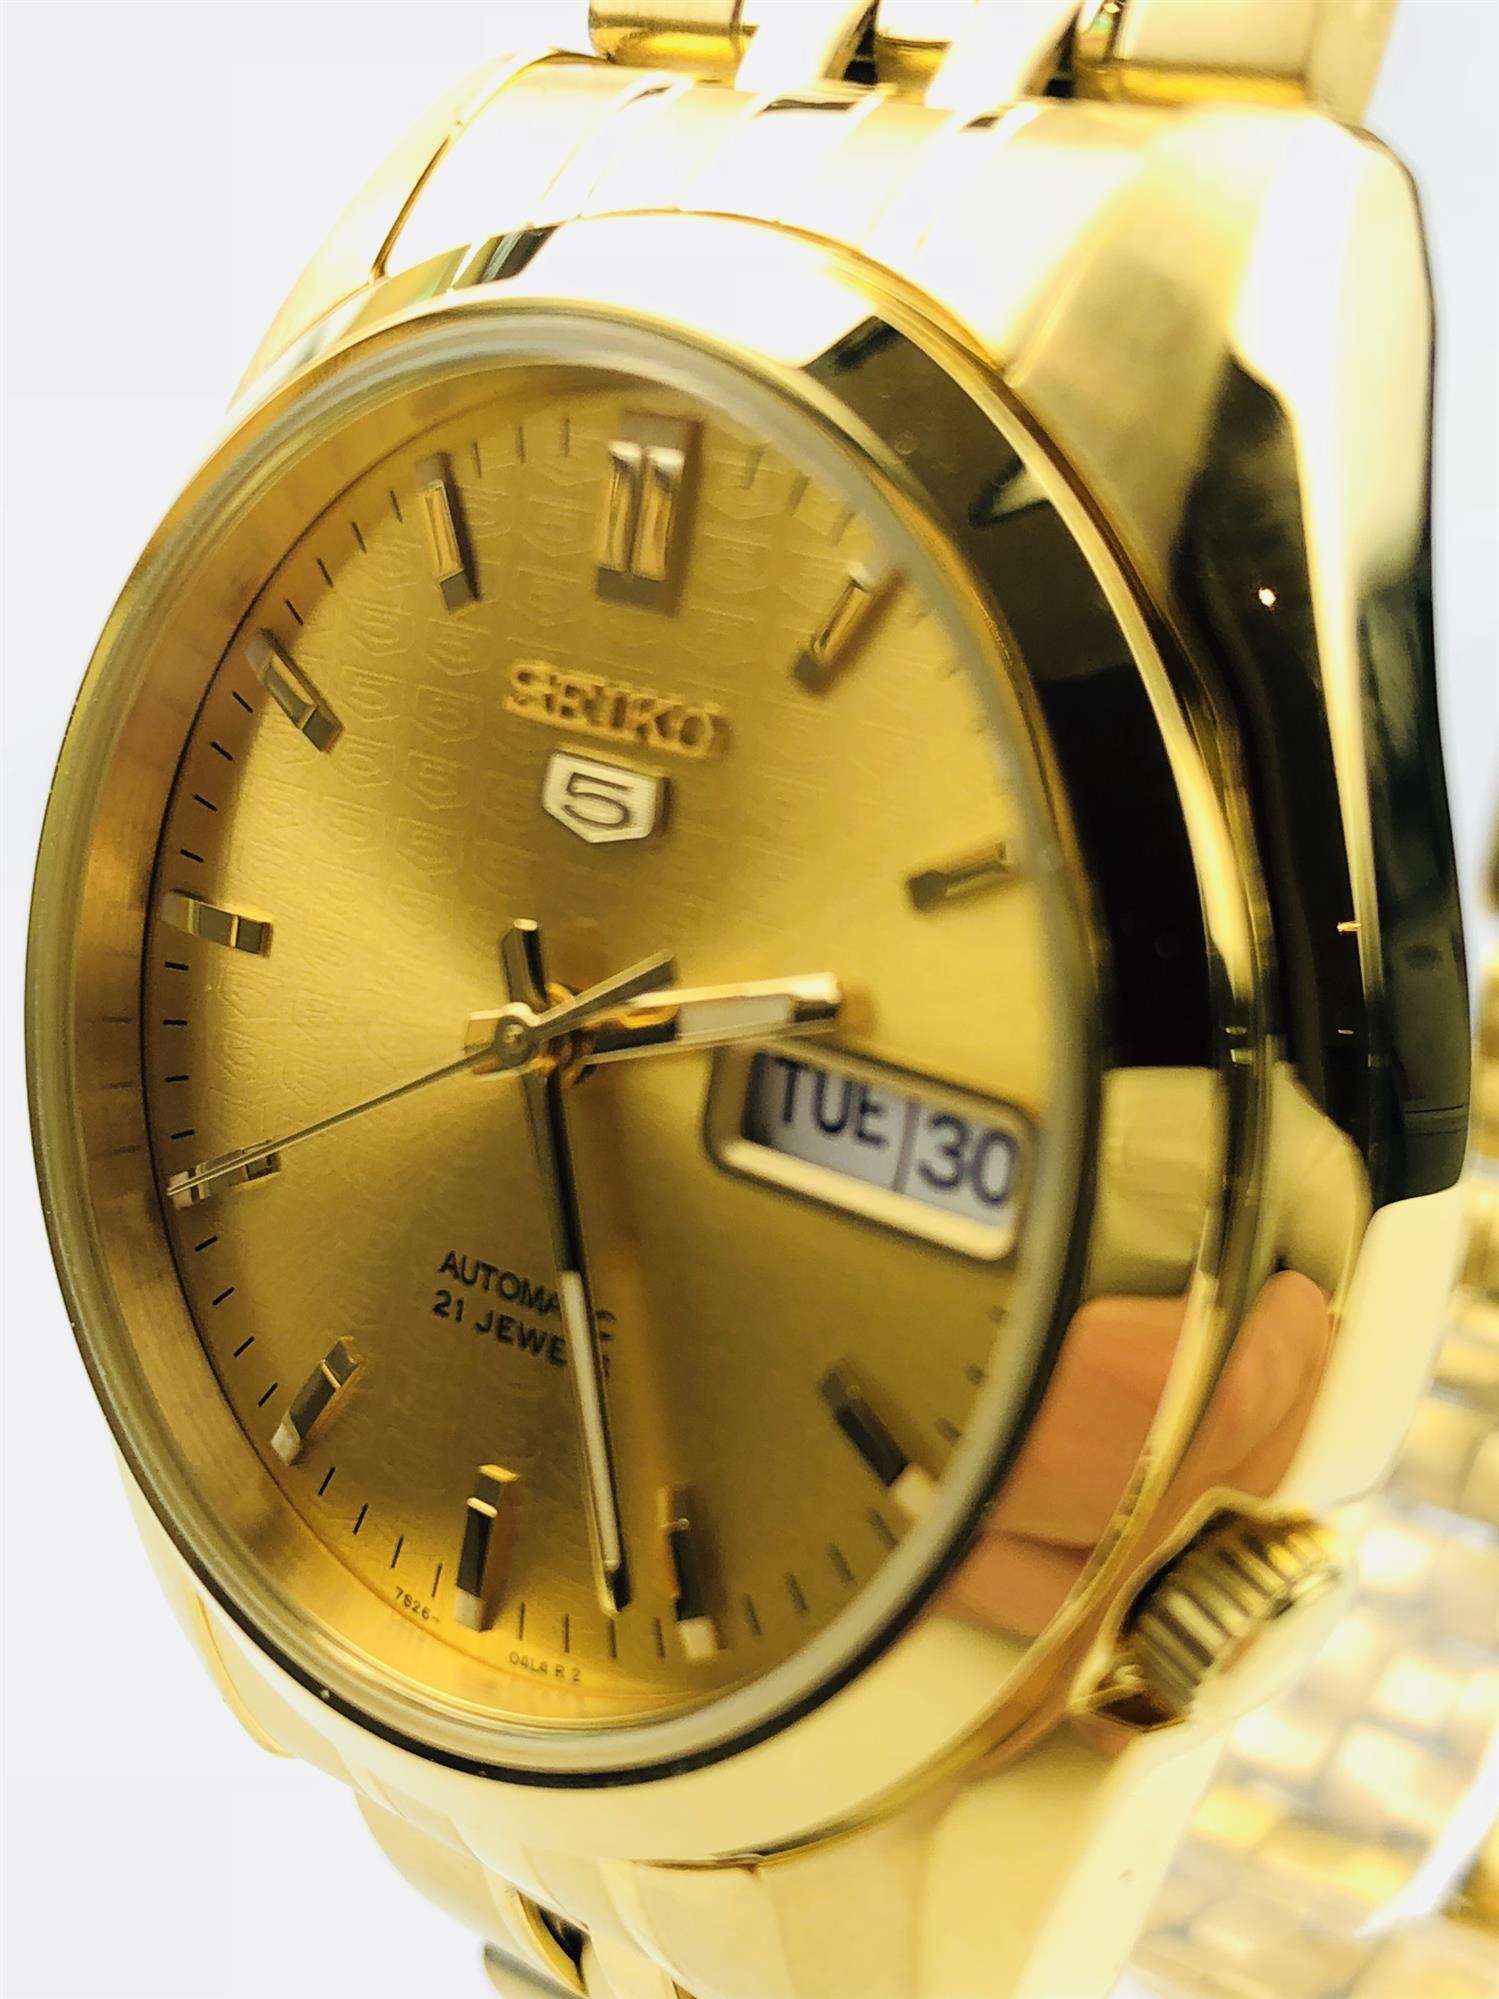 Seiko 5 Automatic Gold PVD Stainless Steel Men’s Watch